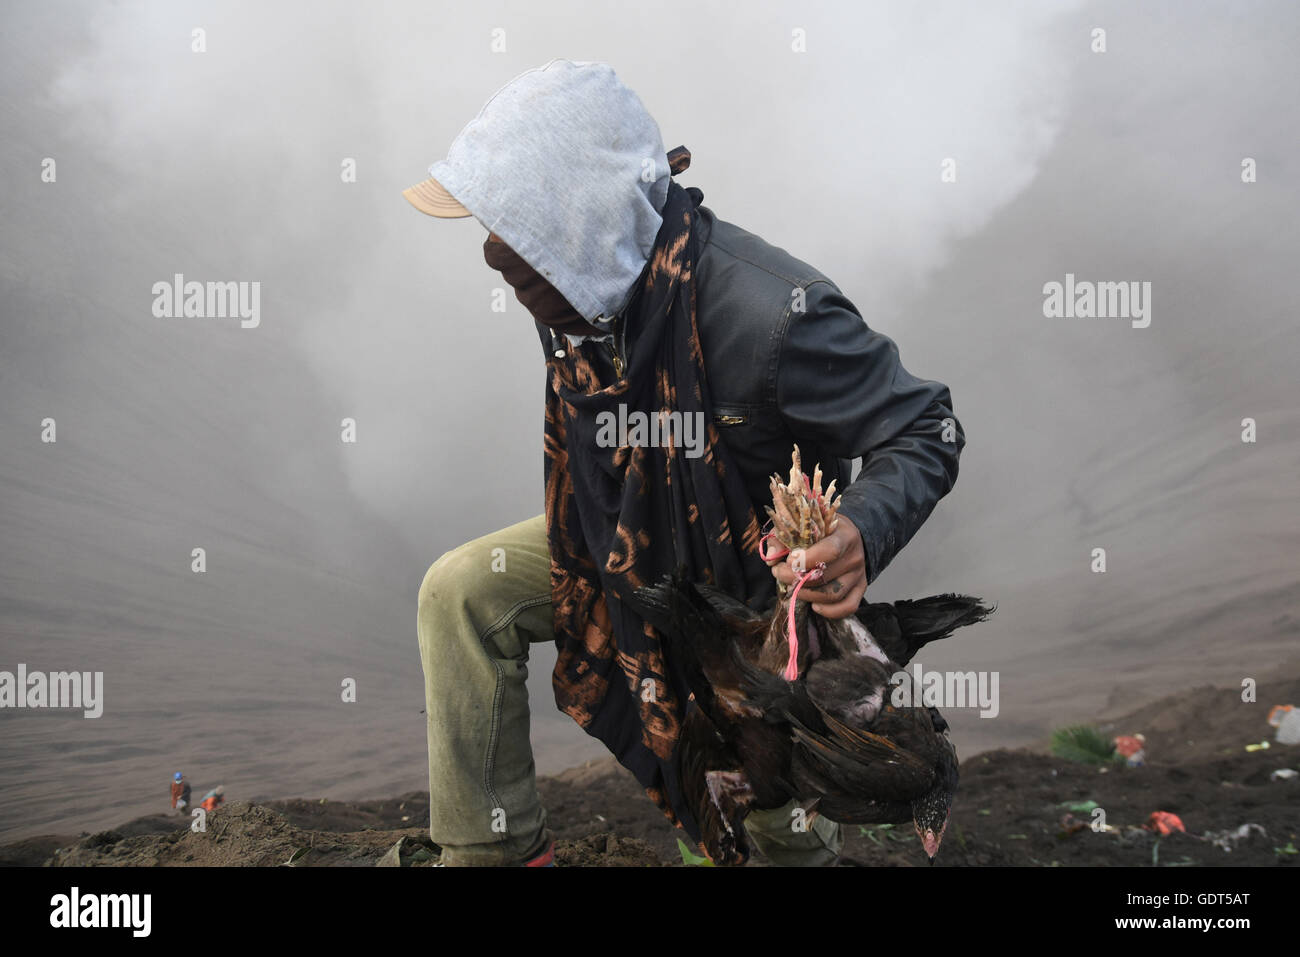 Probolinggo, East Java, Indonesia. 21st July, 2016. A Tenggerese worshipper throws chickens and vegetables for an offering of Mount Bromo during the Yadnya Kasada Festival at crater of Mount Bromo. The festival is the main festival of the Tenggerese people and lasts about a month. On the fourteenth day, the Tenggerese make the journey to Mount Bromo to make offerings of rice, fruits, vegetables, flowers and livestock to the mountain gods by throwing them into the volcano's caldera. © Sijori Images/ZUMA Wire/Alamy Live News Stock Photo